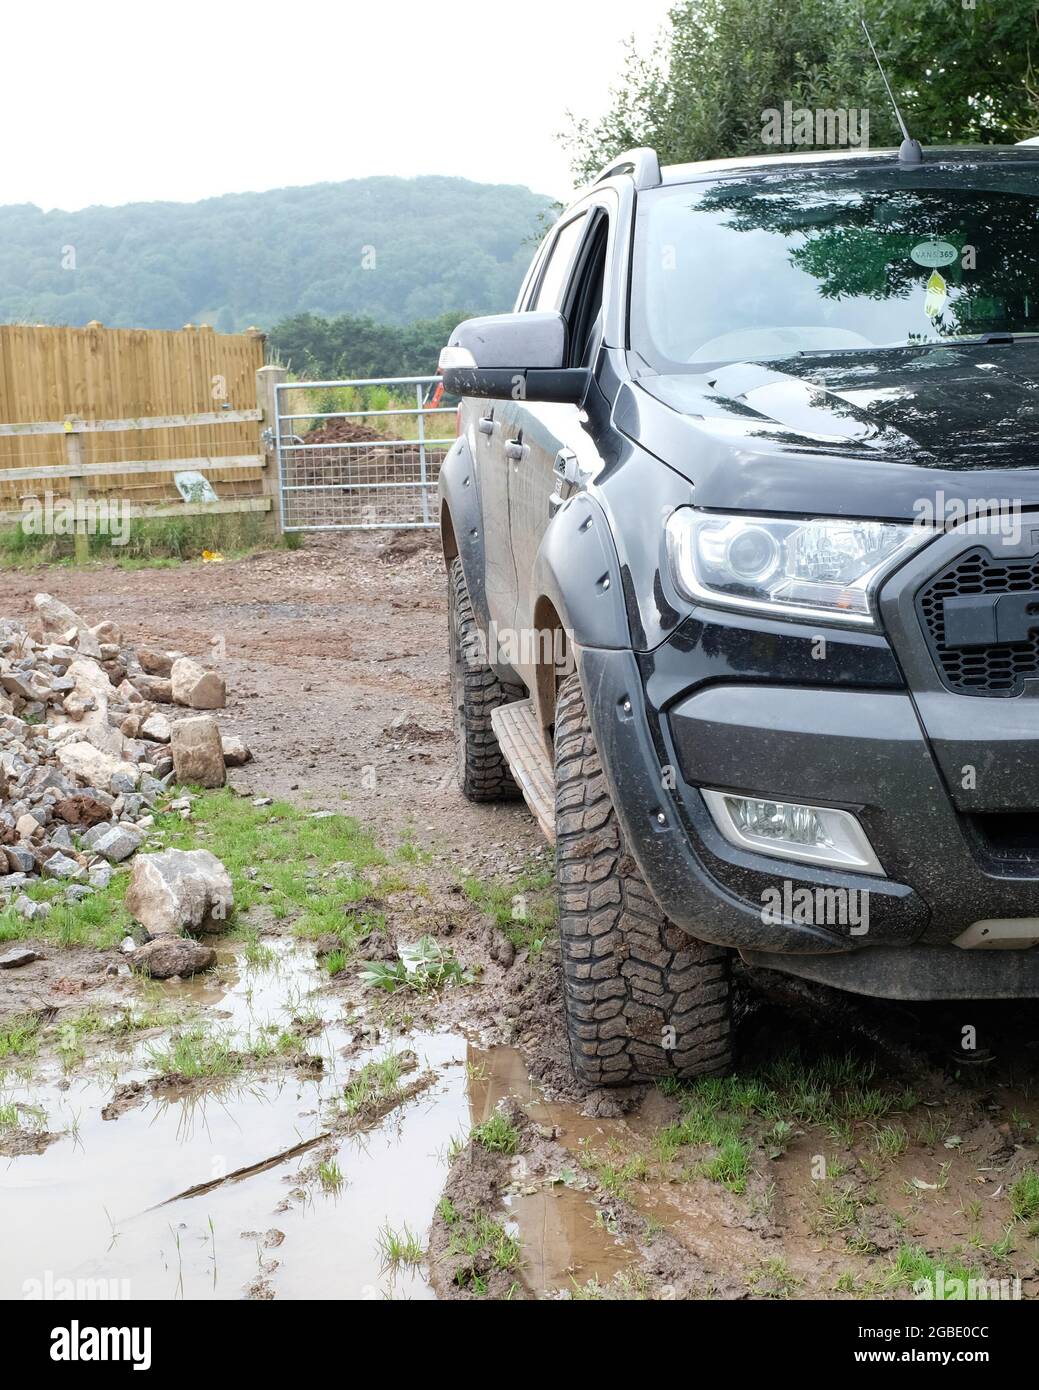 August 2018 - Ford truck beside a mud puddle on a construction site in rural Somerset, UK. Stock Photo